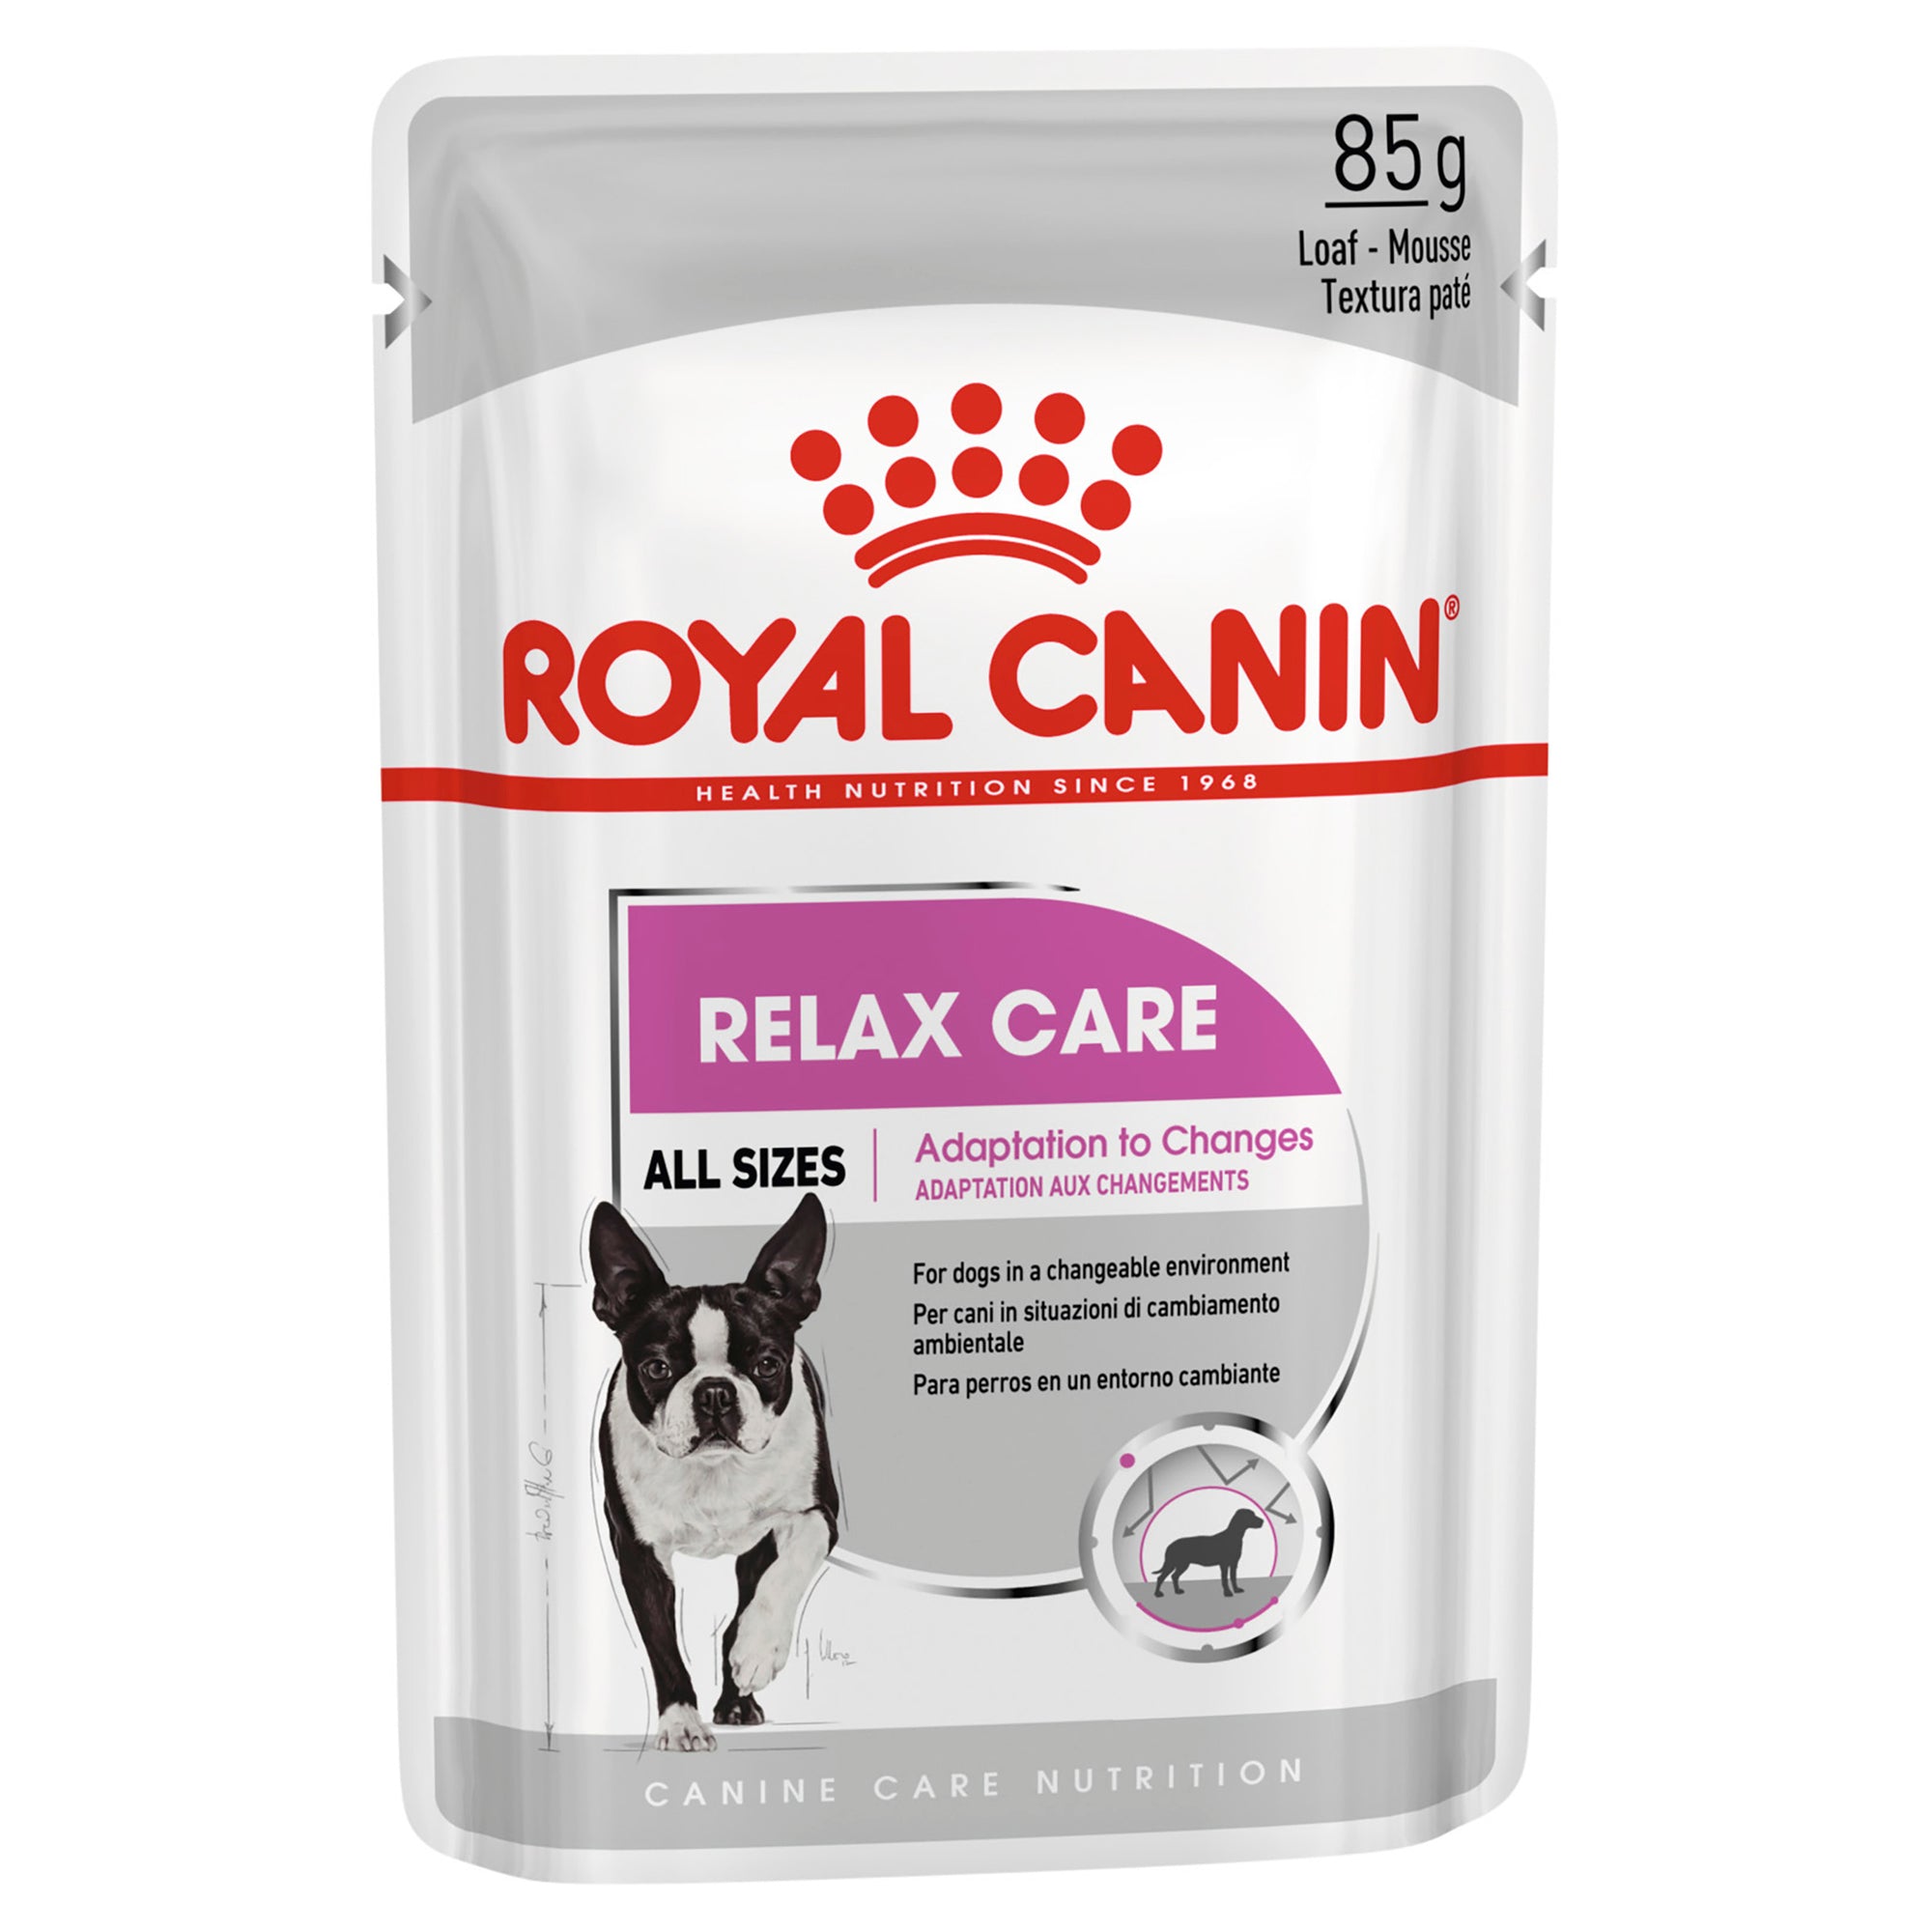 Royal Canin Relax Care Loaf Pouches - RSPCA VIC